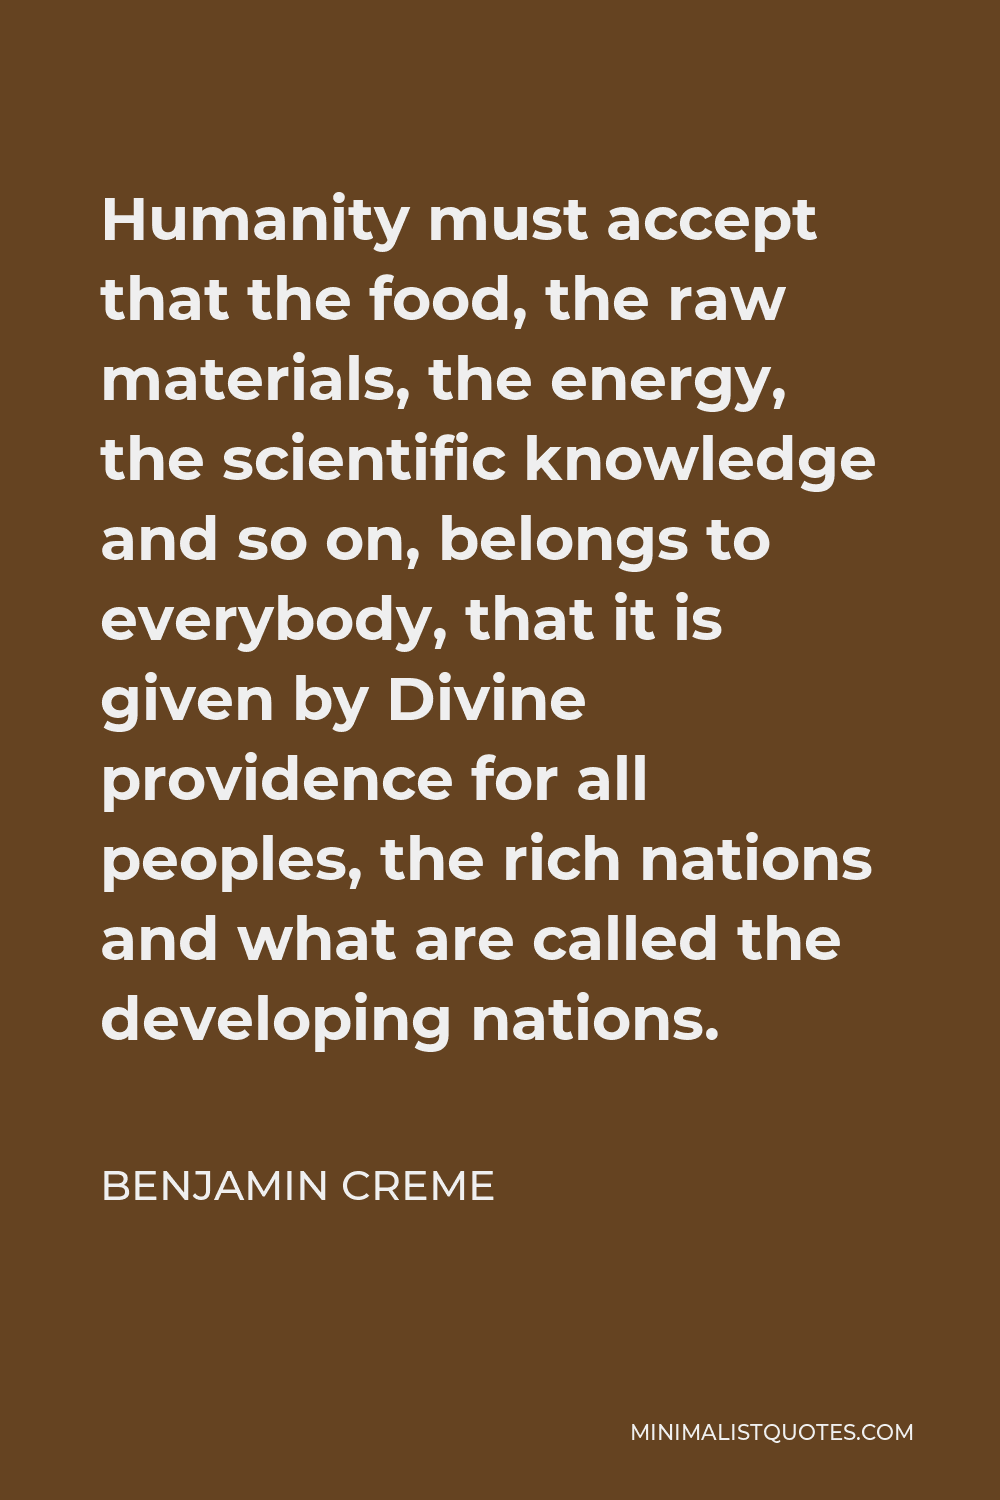 Benjamin Creme Quote - Humanity must accept that the food, the raw materials, the energy, the scientific knowledge and so on, belongs to everybody, that it is given by Divine providence for all peoples, the rich nations and what are called the developing nations.